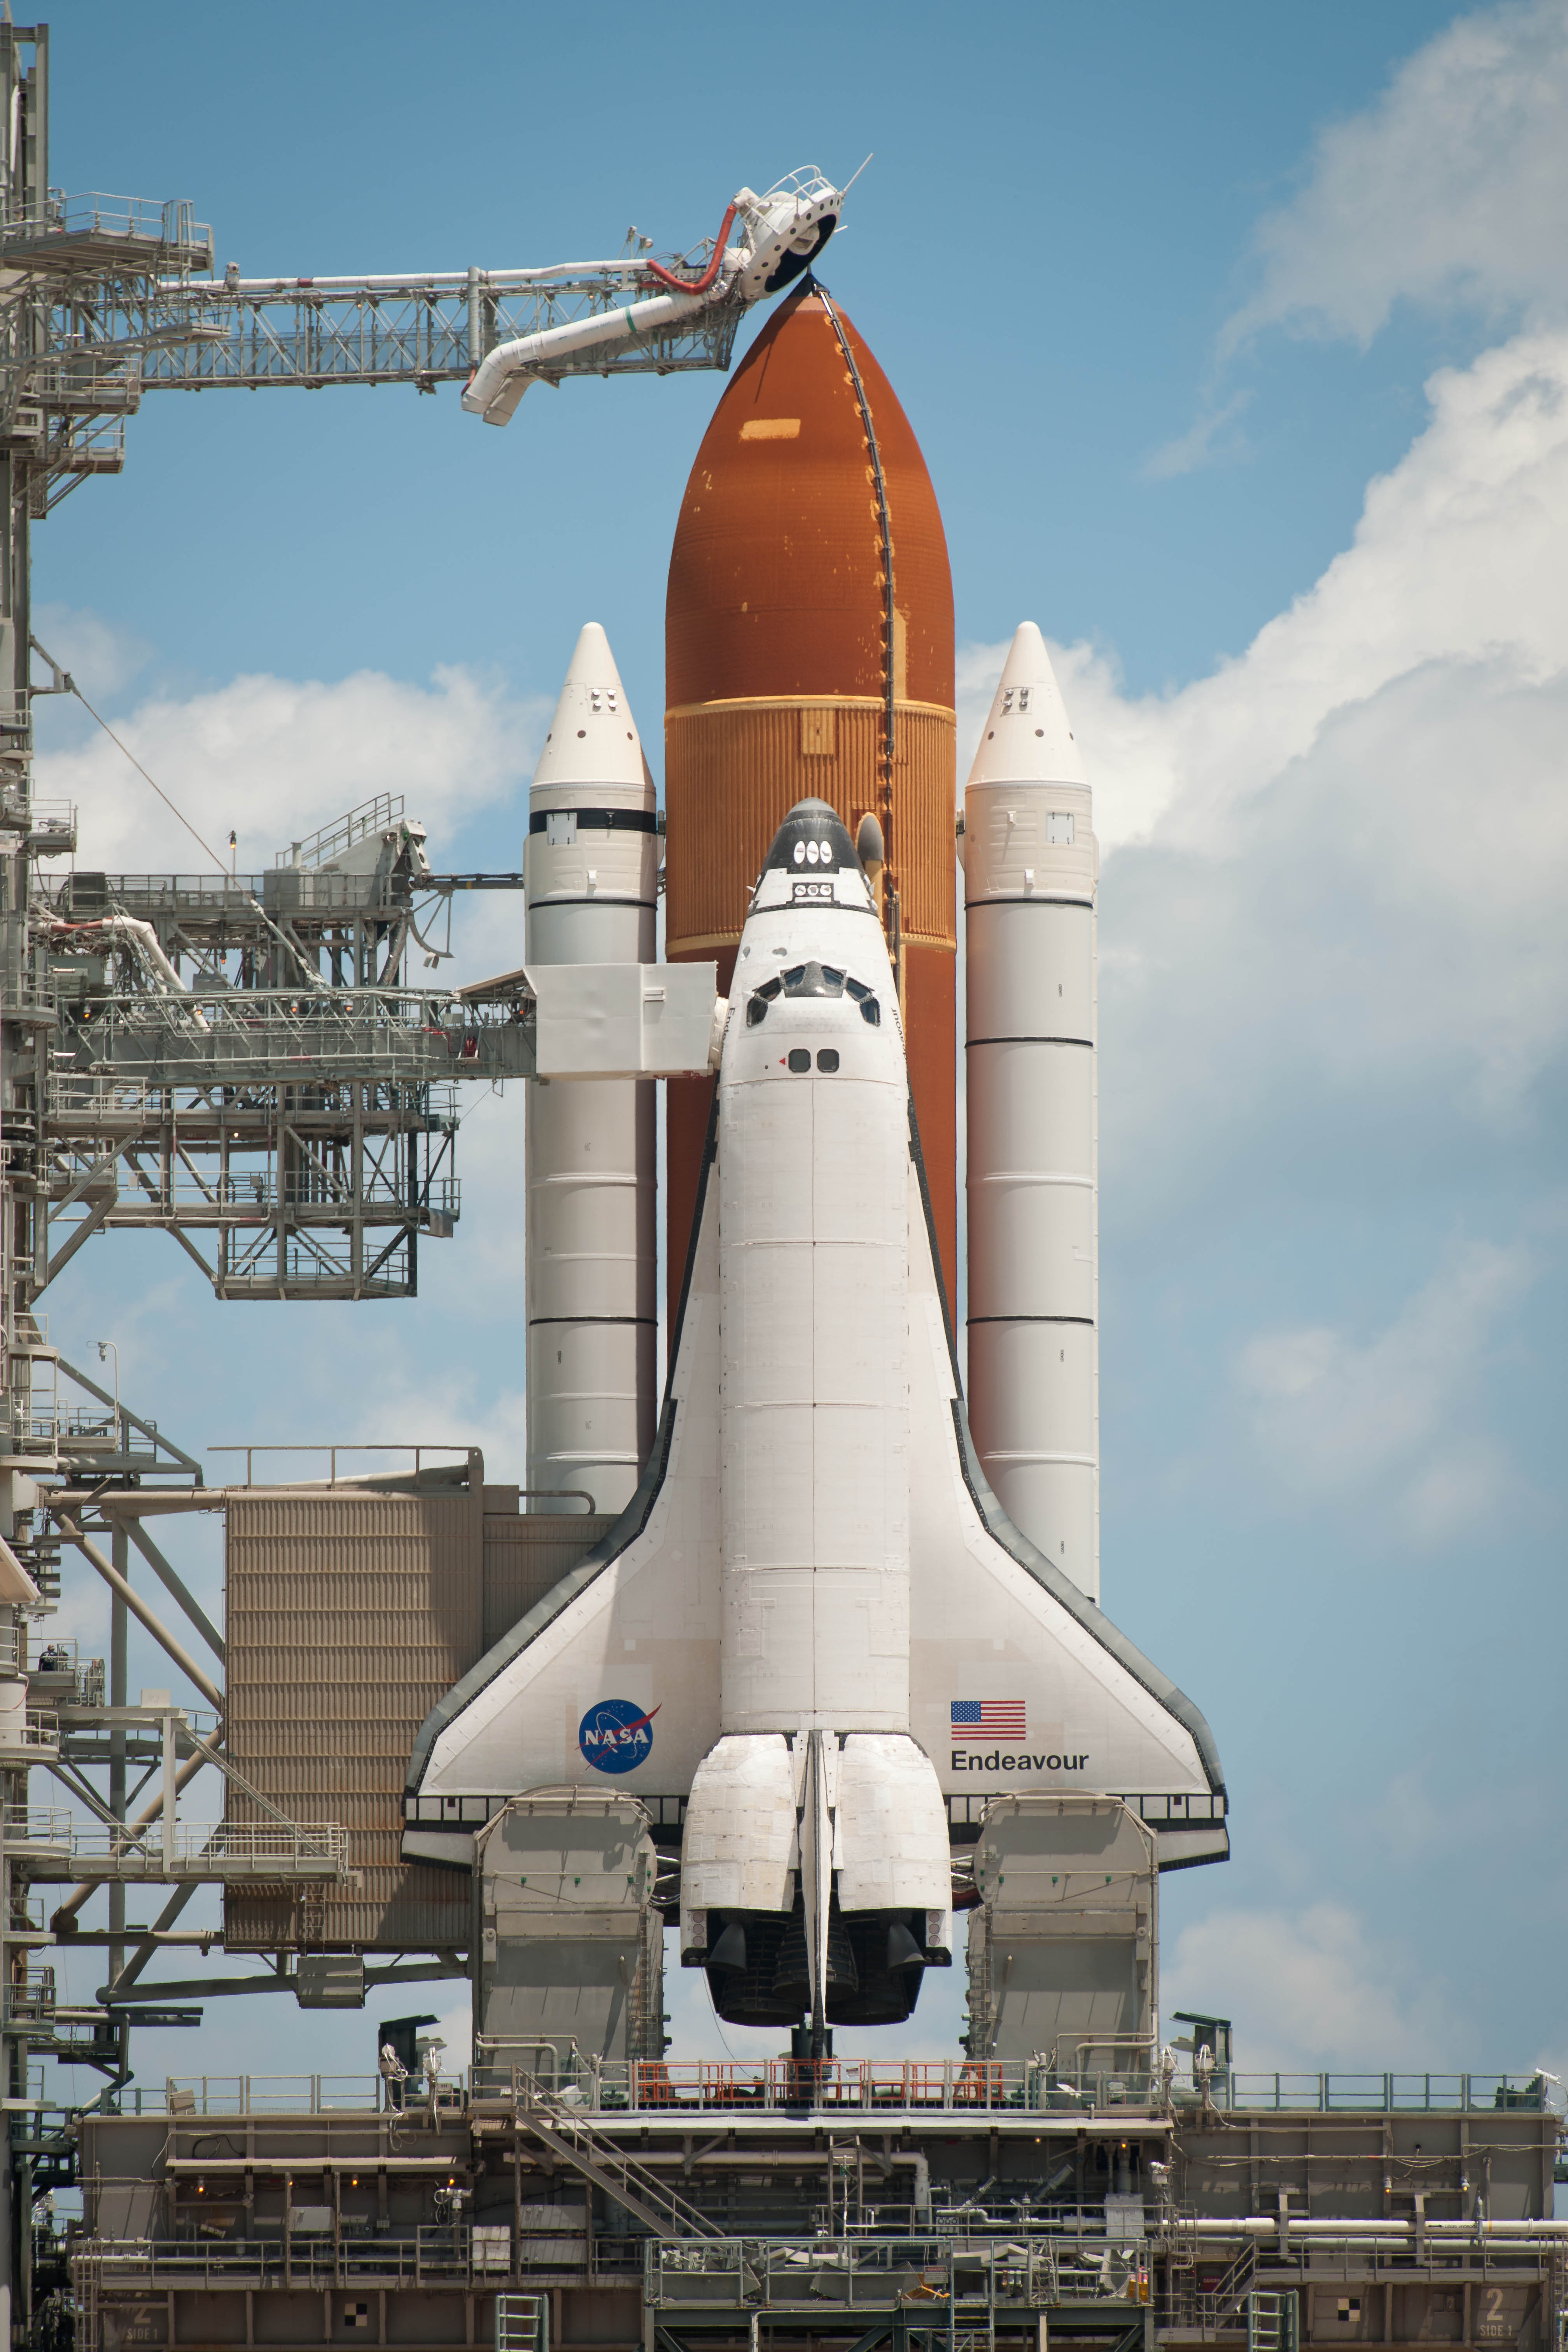 NASA's Endeavour STS-134 on launch pad at Kennedy Space Flight Center.